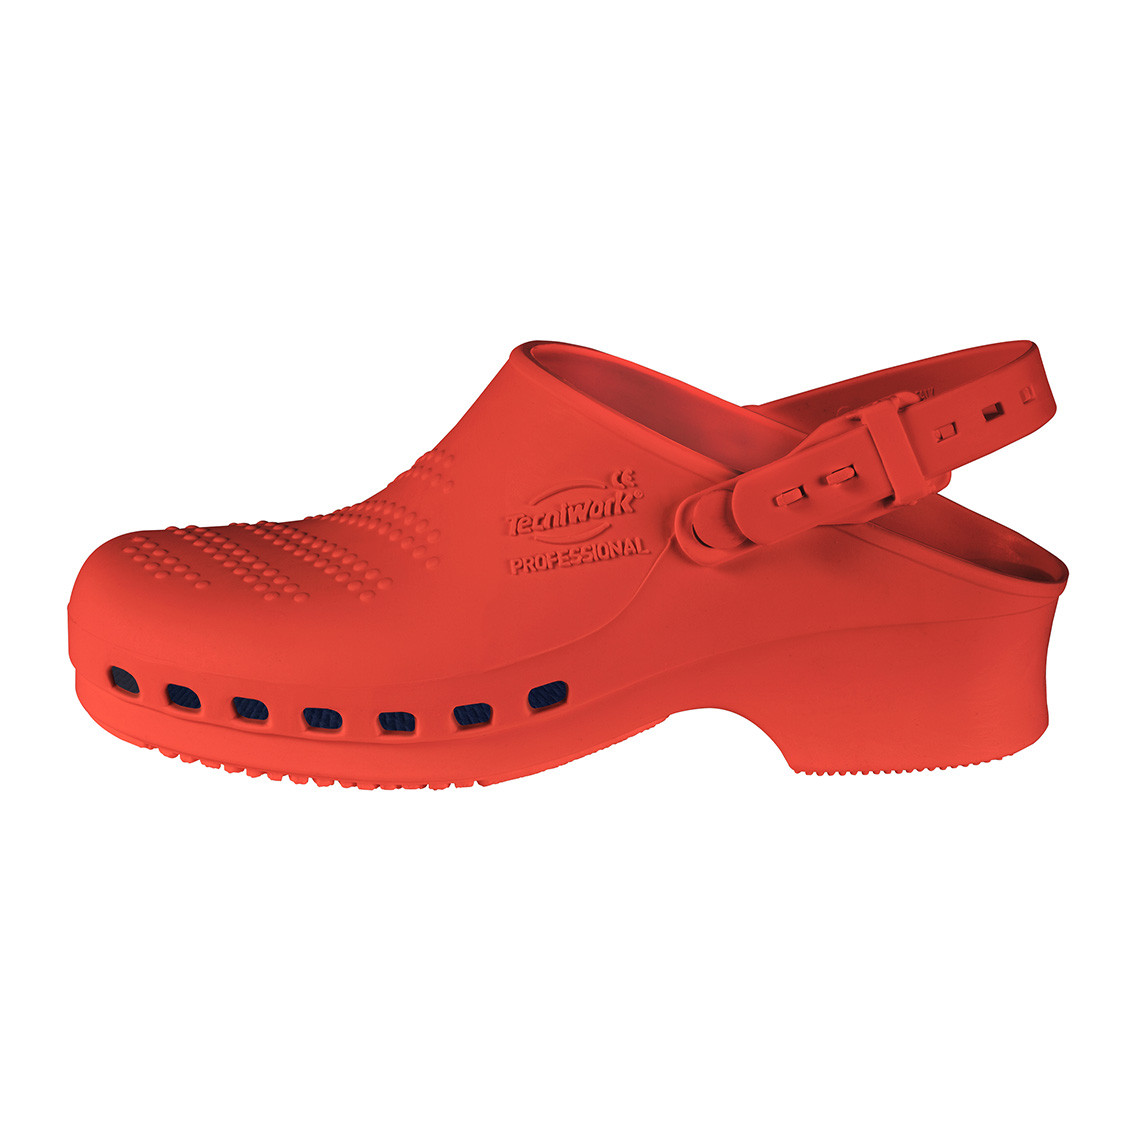 Professional sanitary clogs red Size 45/46